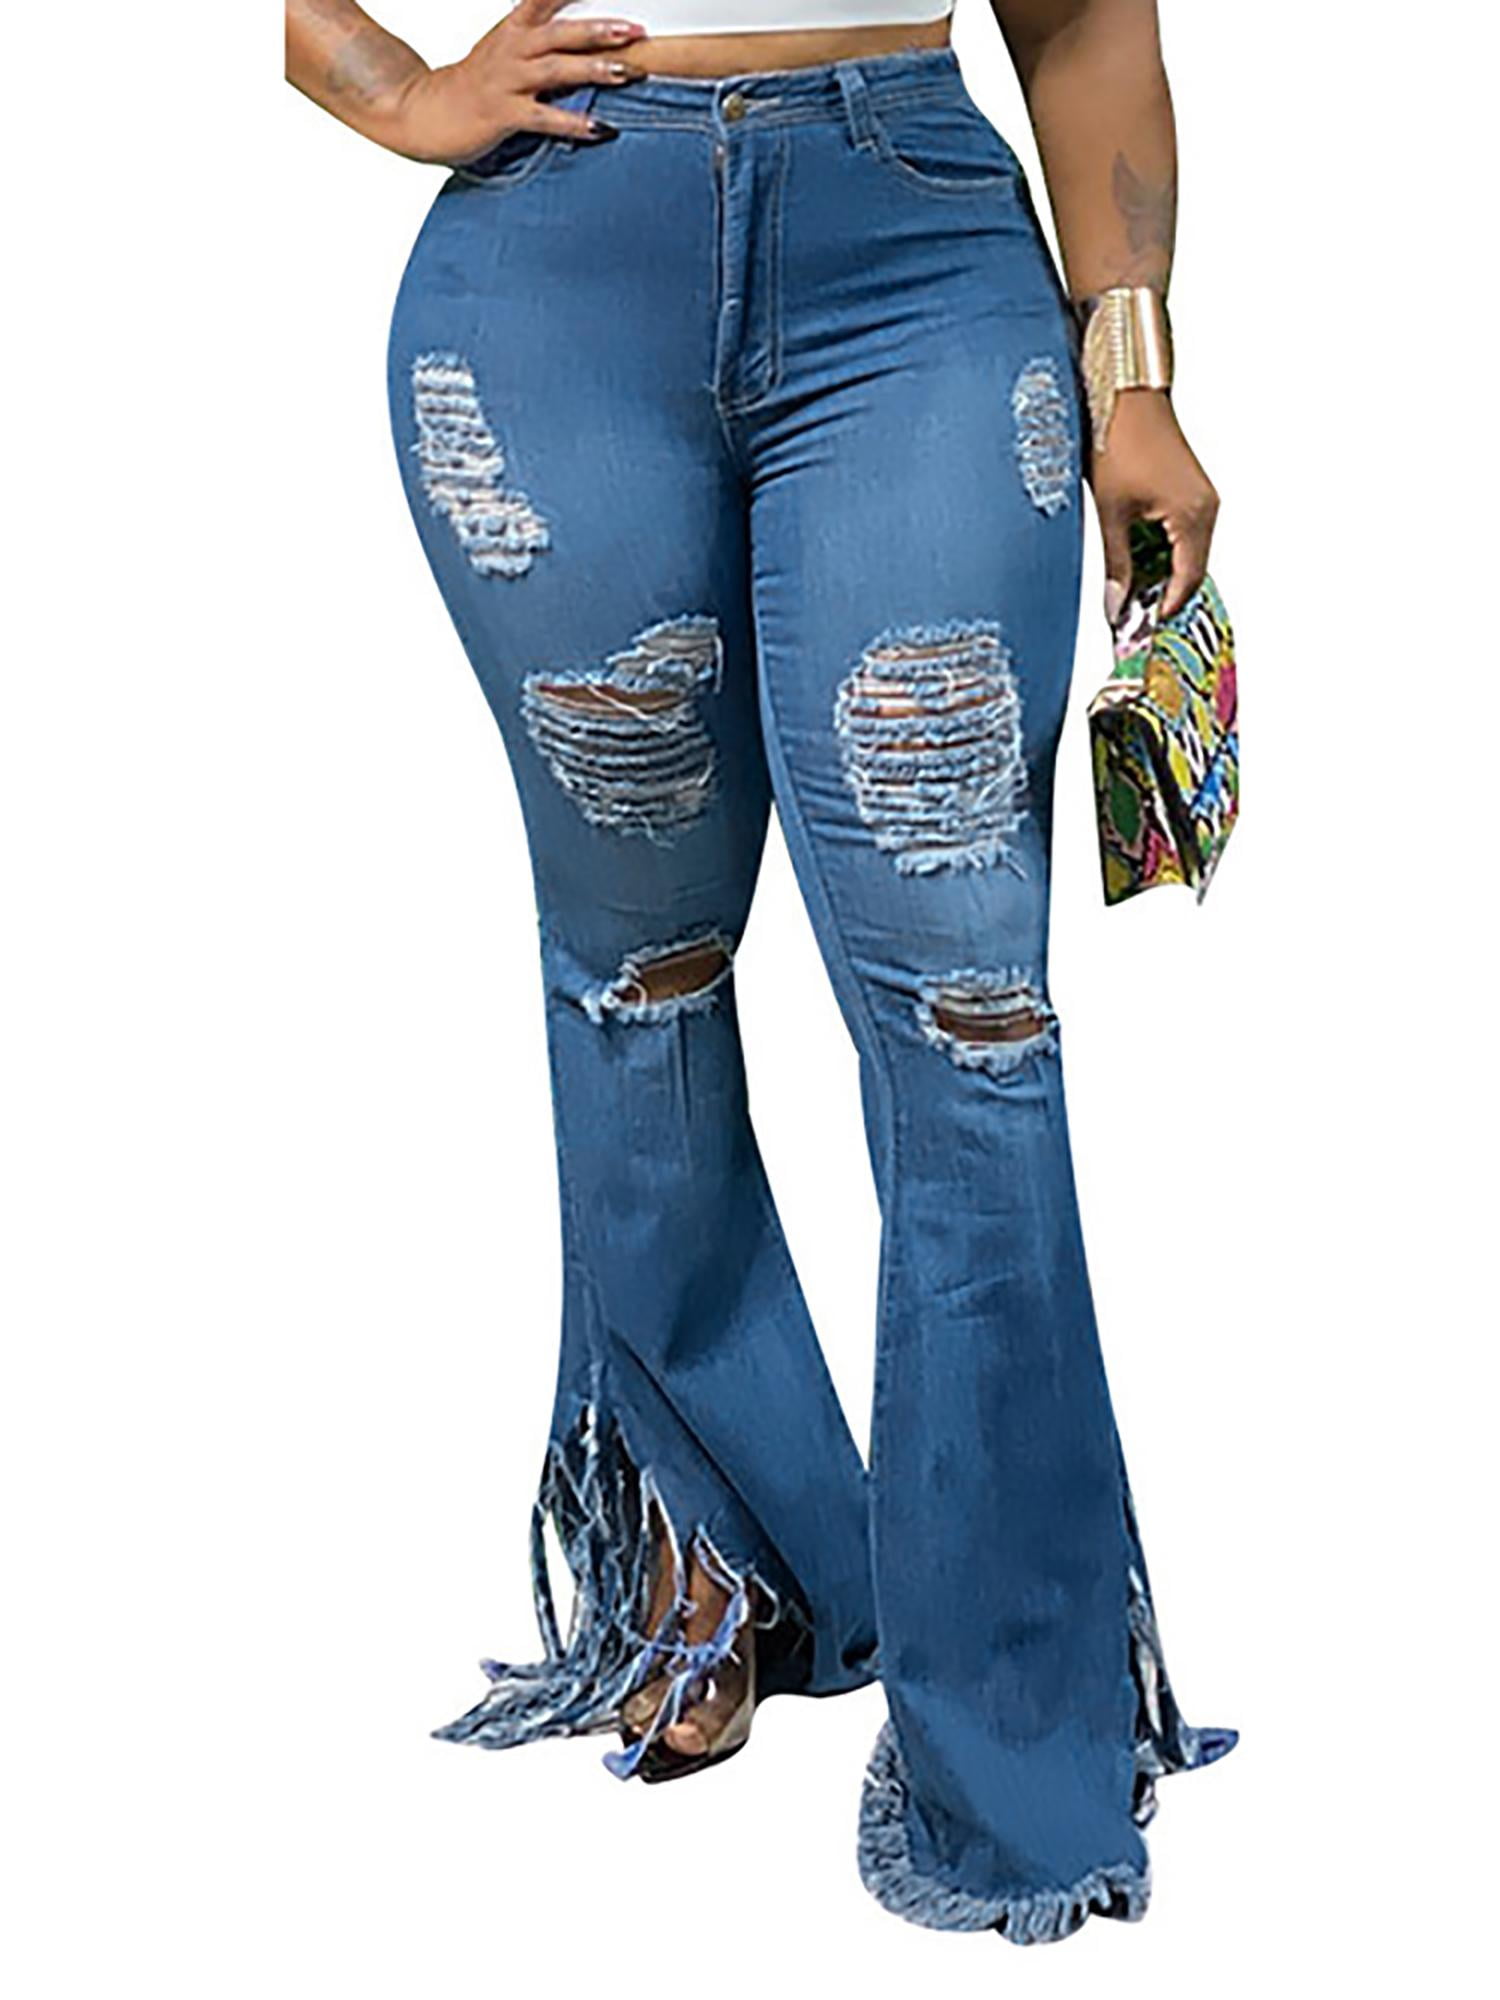 LAPA Women's Flare Jeans High Waist Ripped Hole Bootcut Casual Bell ...